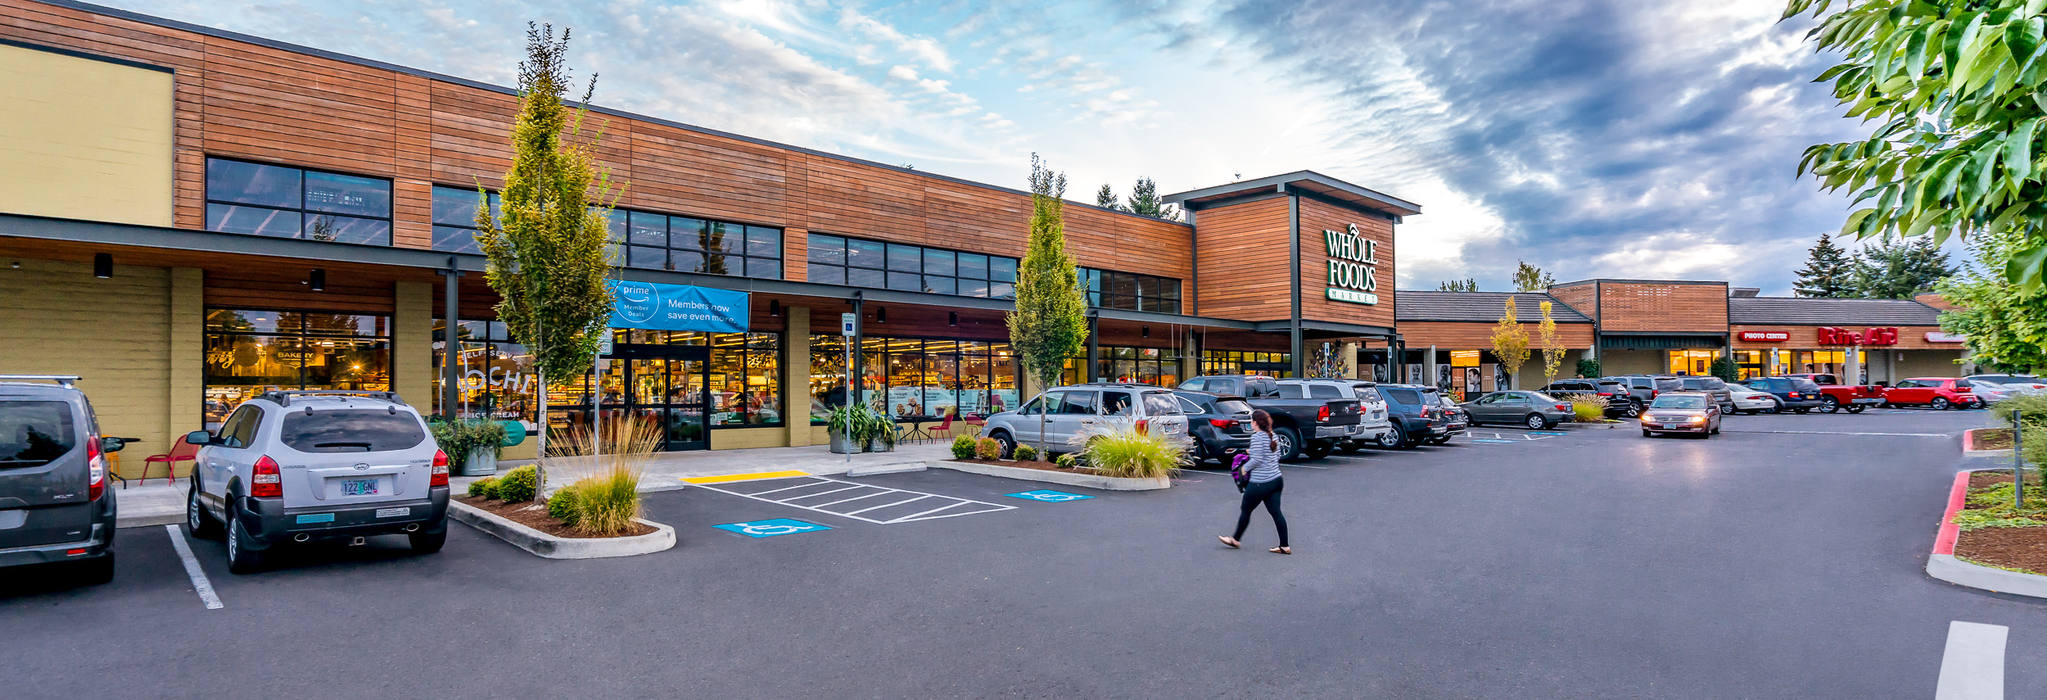 Tigard, Oregon OR - Available Retail Space & Restaurant Space for Lease ...